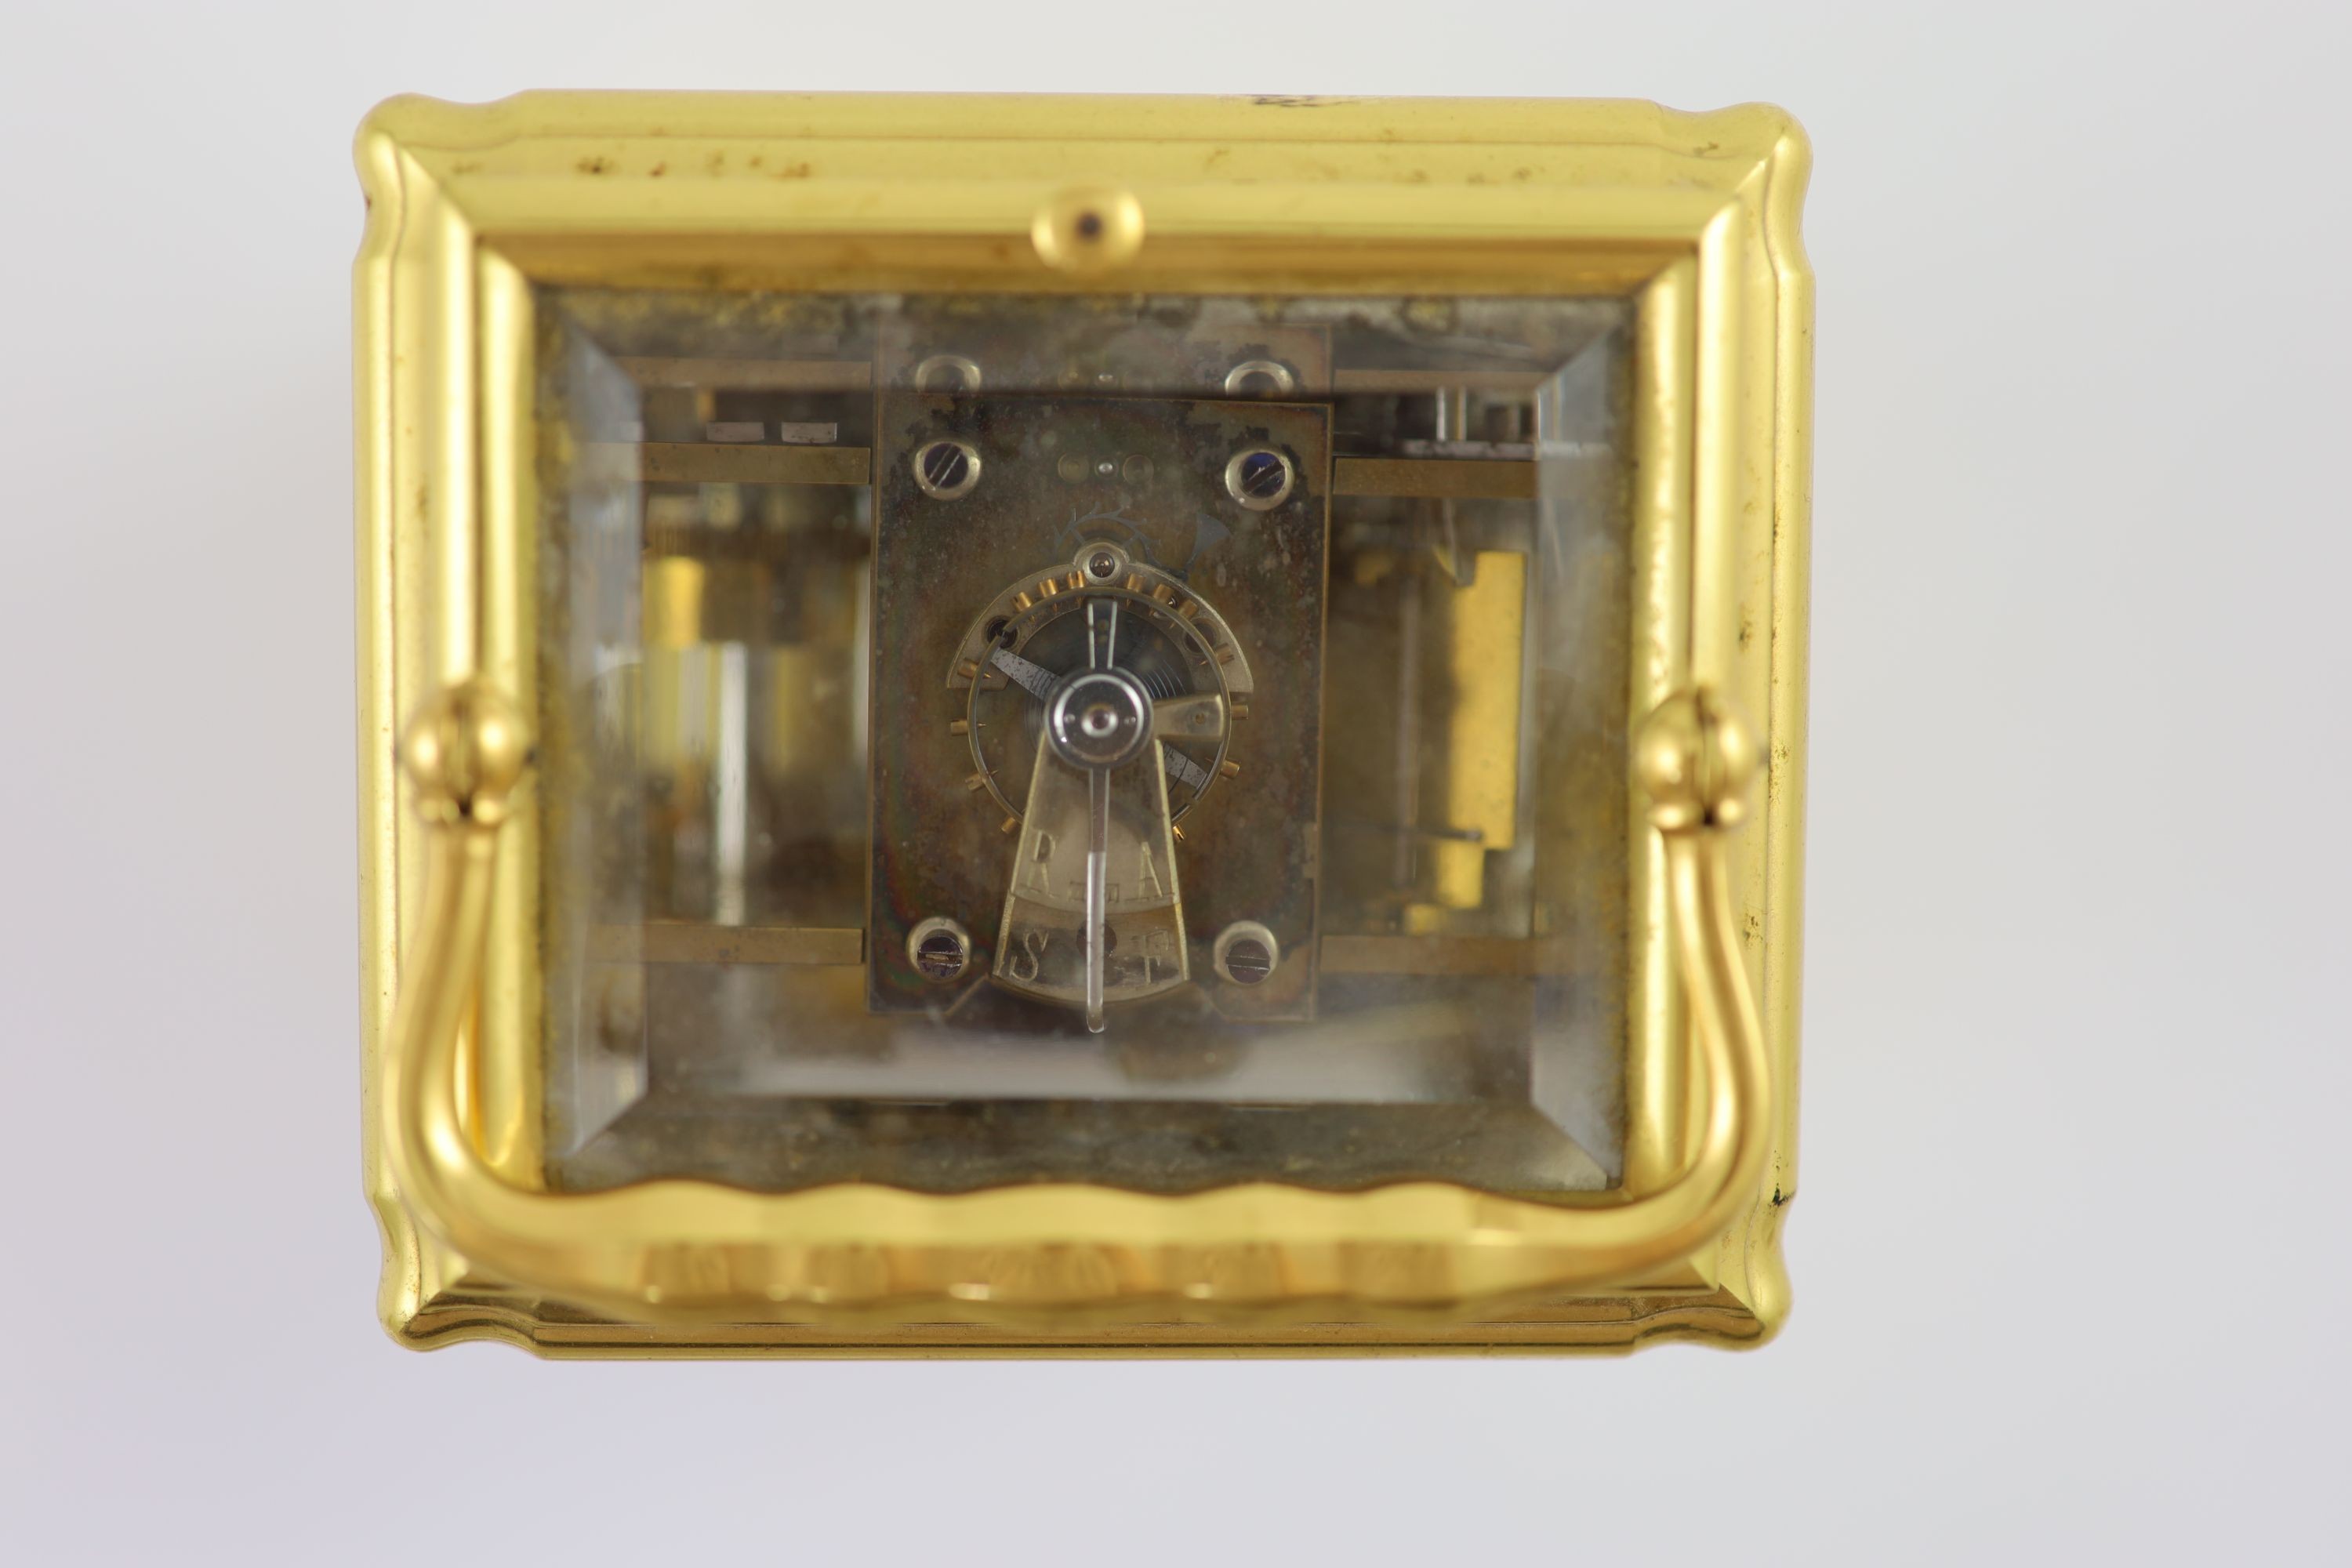 An early 20th century French quarter repeating Grand Sonnerie carriage alarum clockwith gorge case - Image 6 of 6